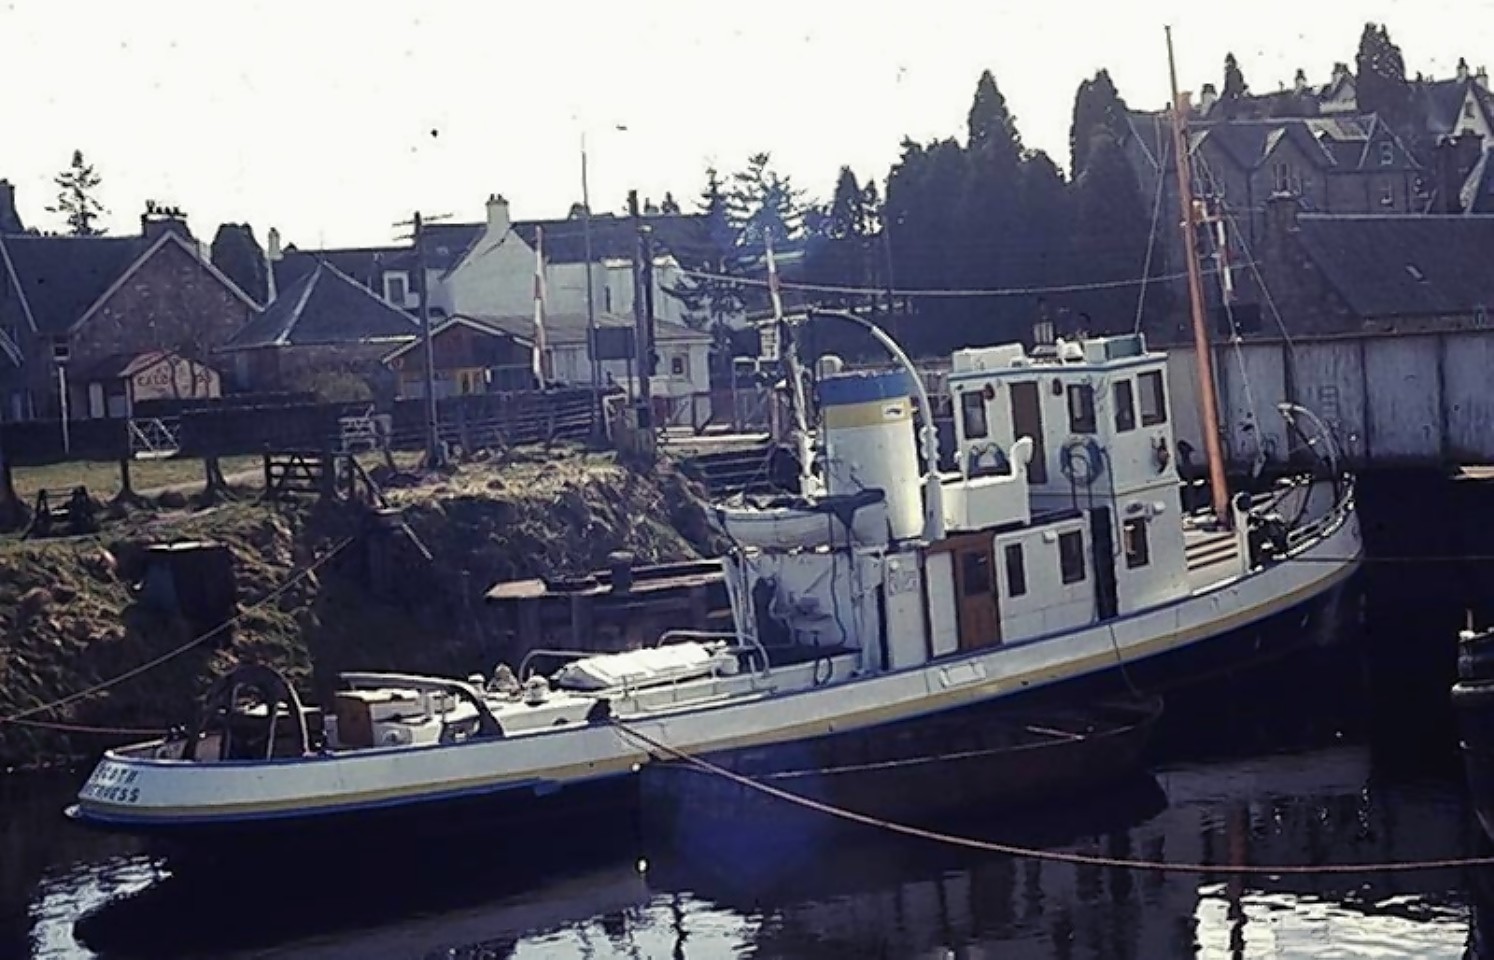 Plans are in place to restore the vessel over a five year period